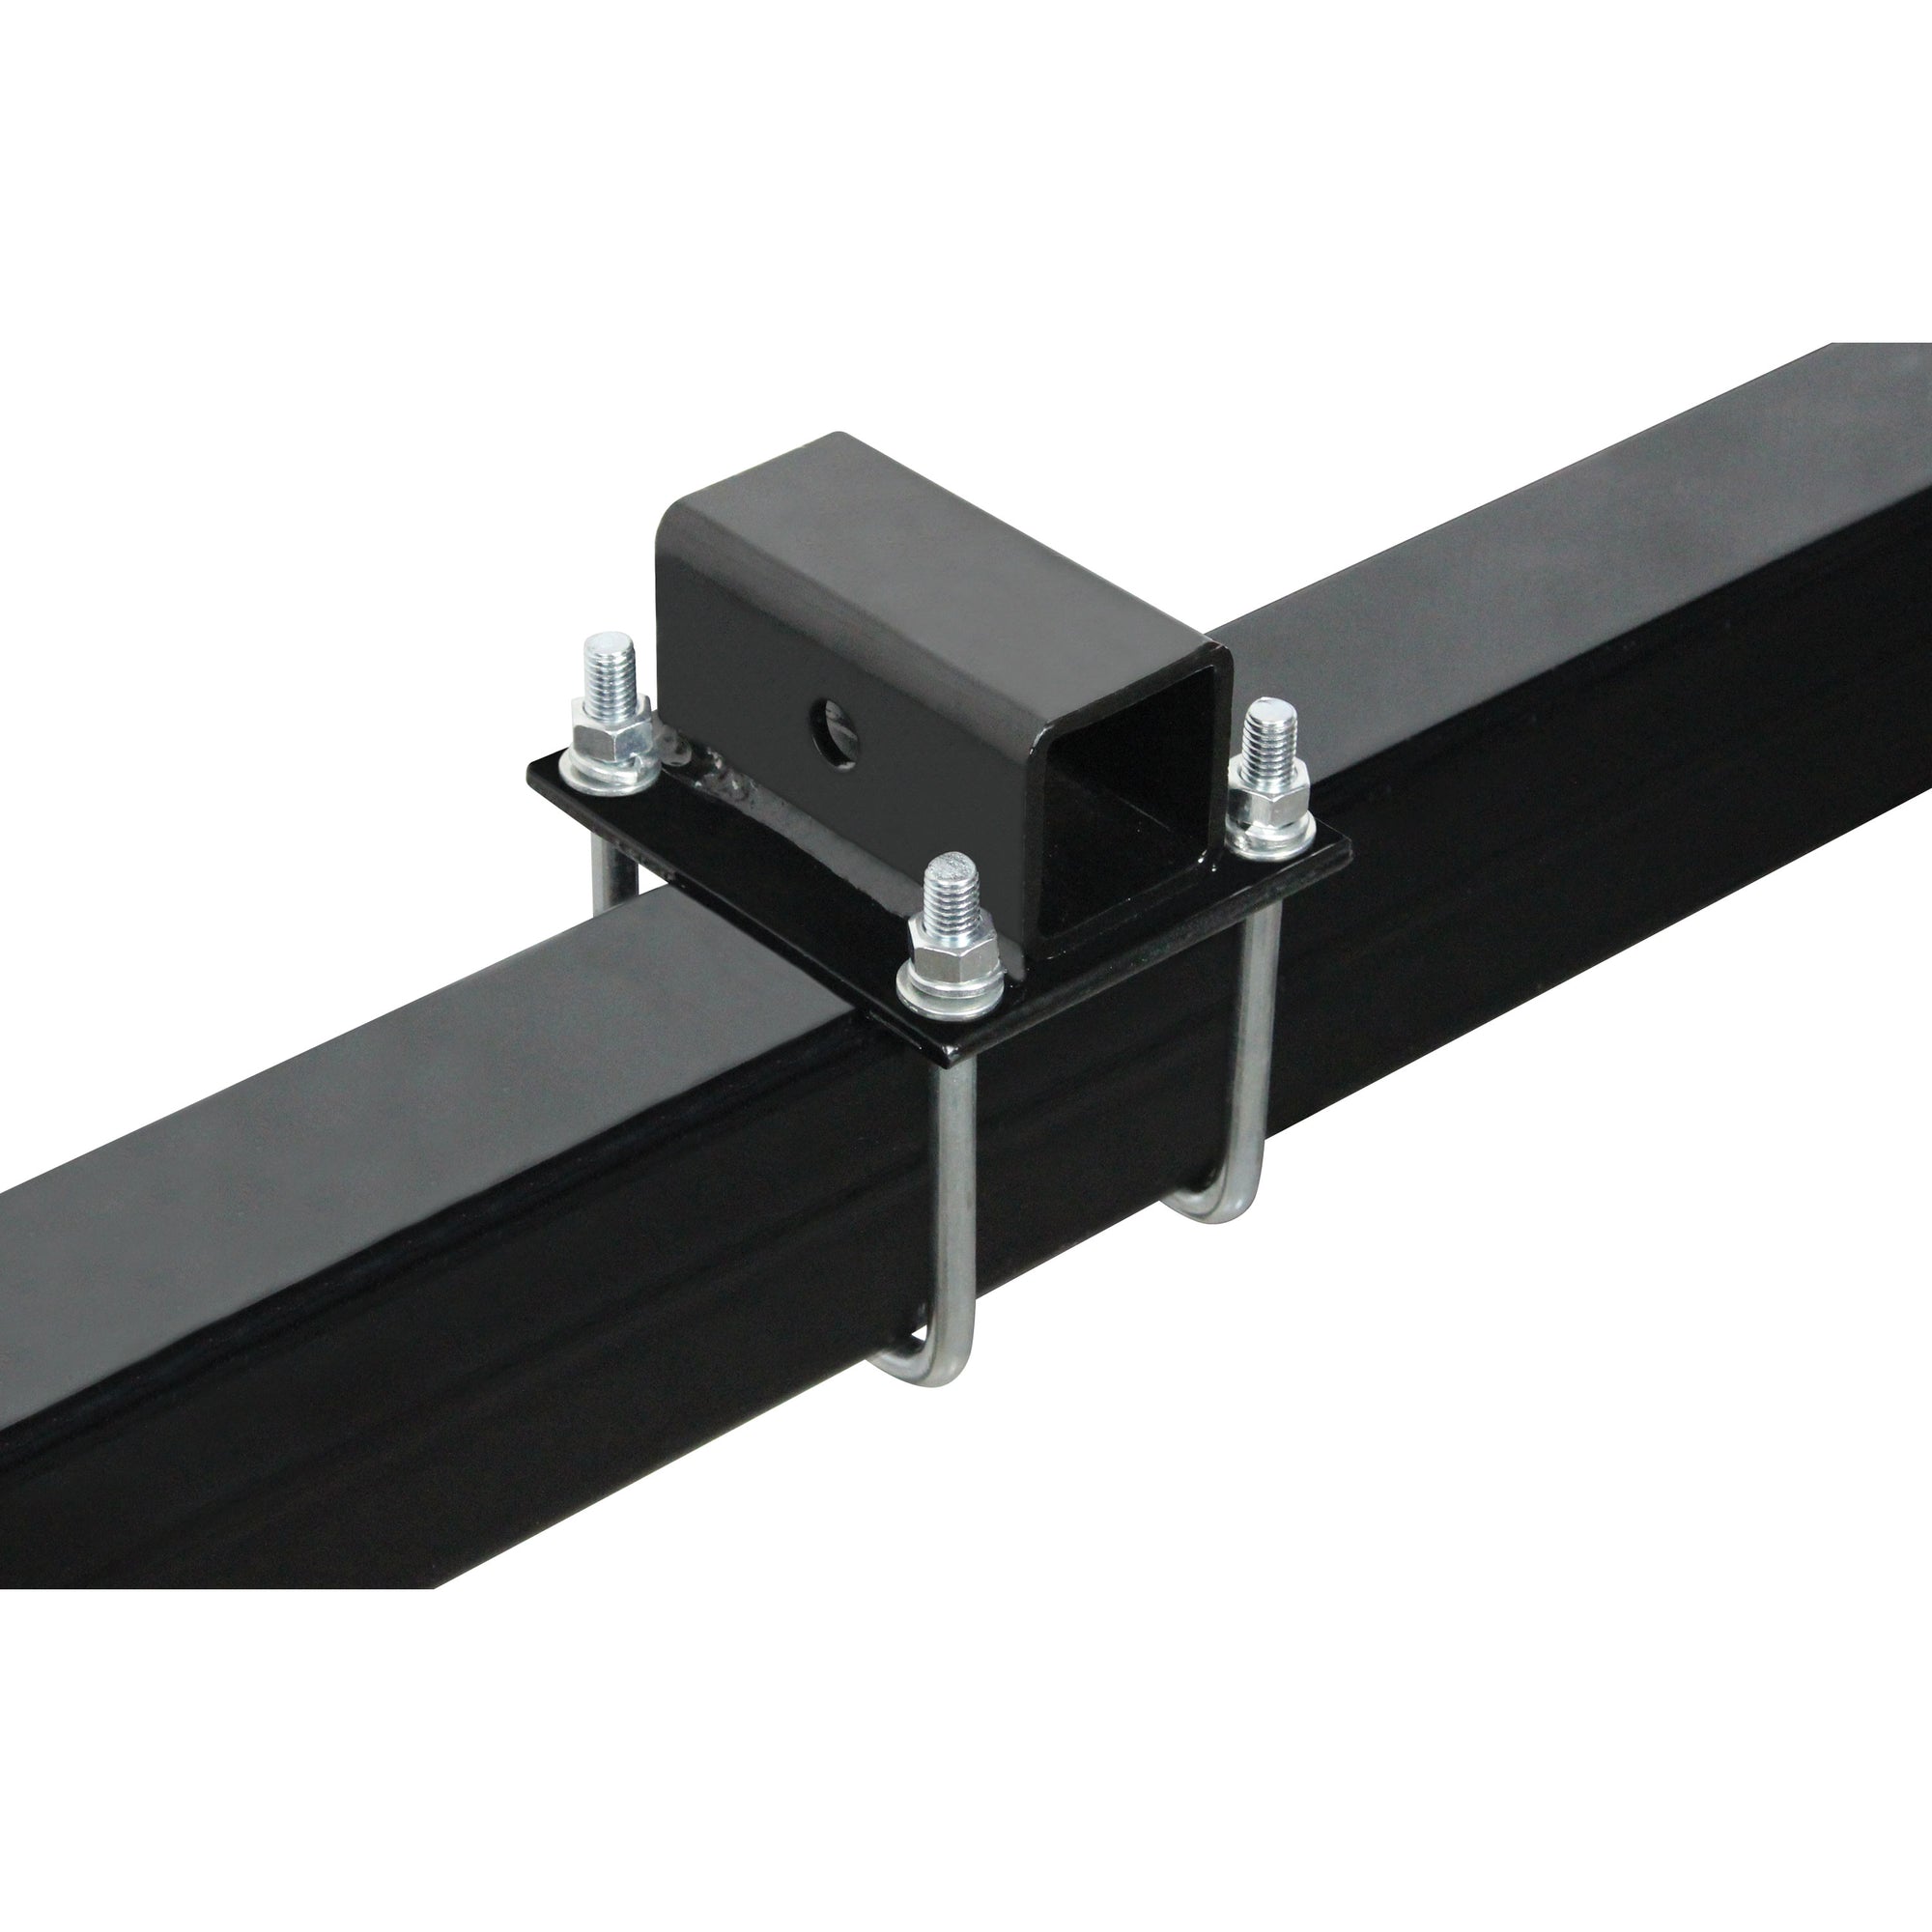 Quick Products QPERBAB Economy Bolt-On RV Bumper Adapter for 4" x 4" Bumper - 2" Receiver, 200 lbs. Tongue Weight Capacity